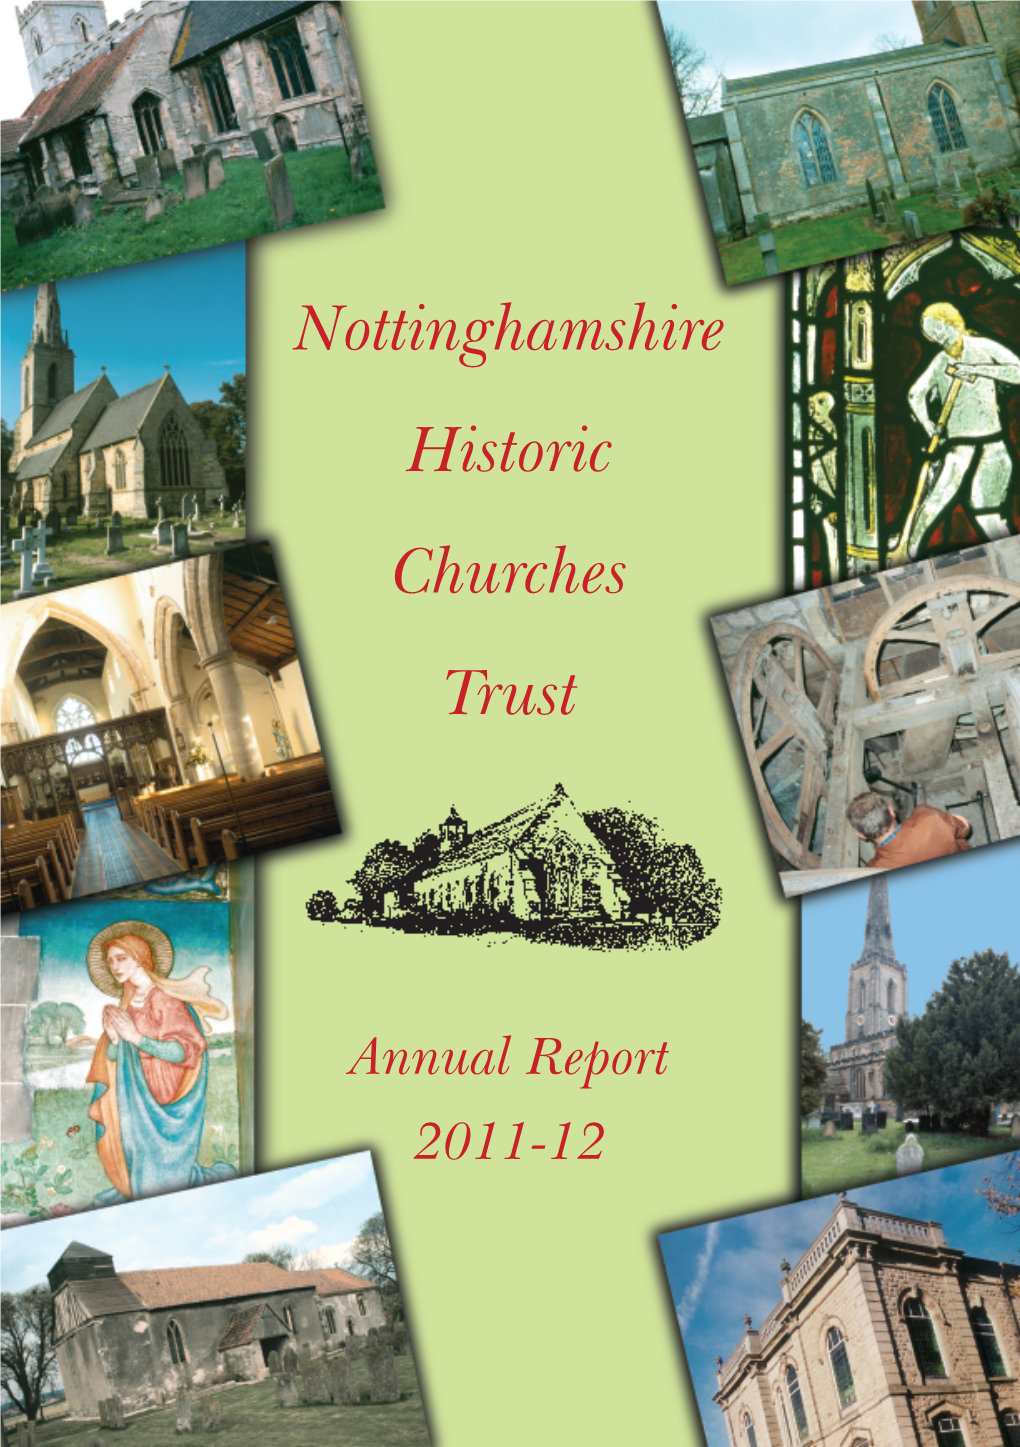 Annual Report 2011-12 the Nottinghamshire Historic Churches Trust